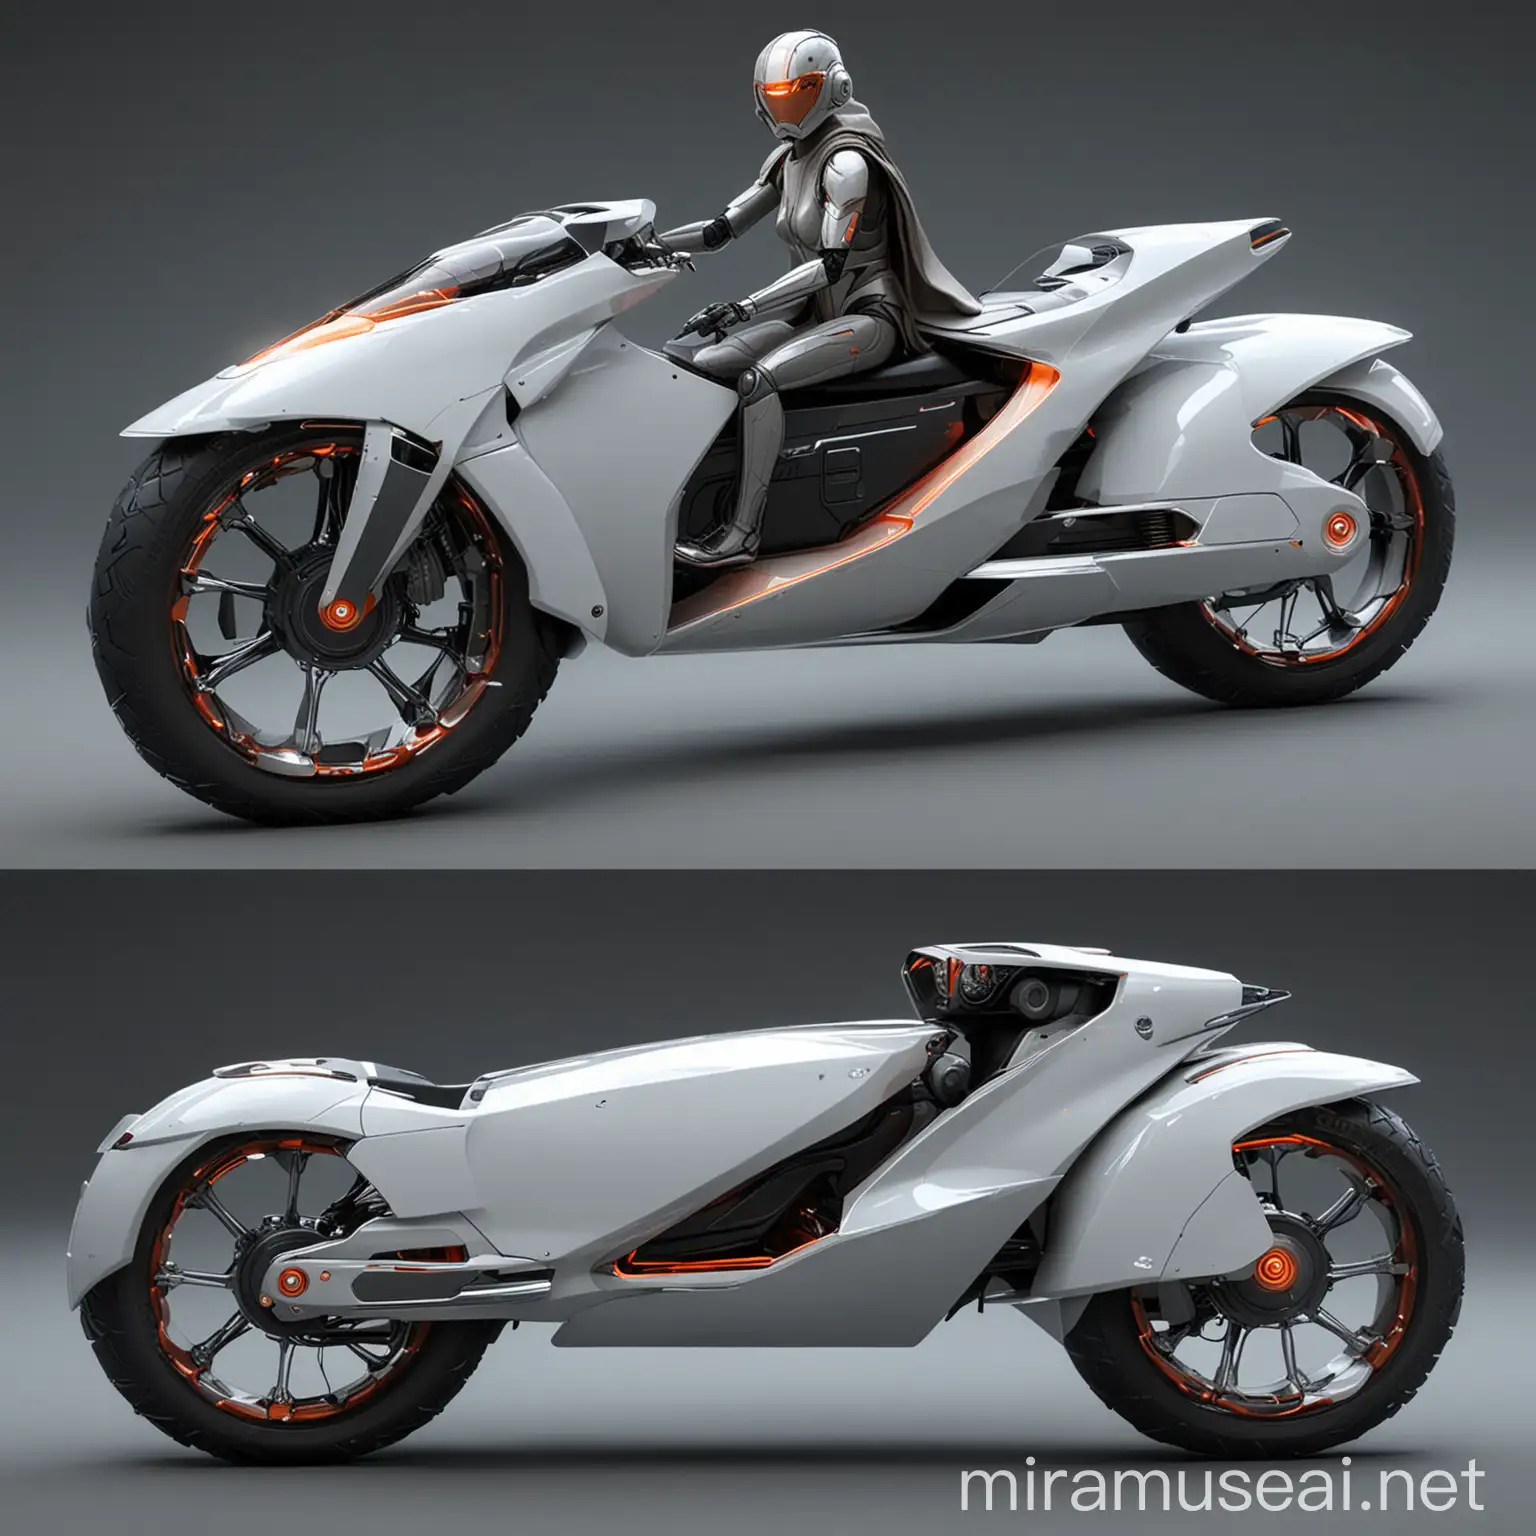 A futuristic, Jedi-style, human-powered two-wheeled vehicle, with sleek and minimalist design, glowing accents, and ergonomic seating